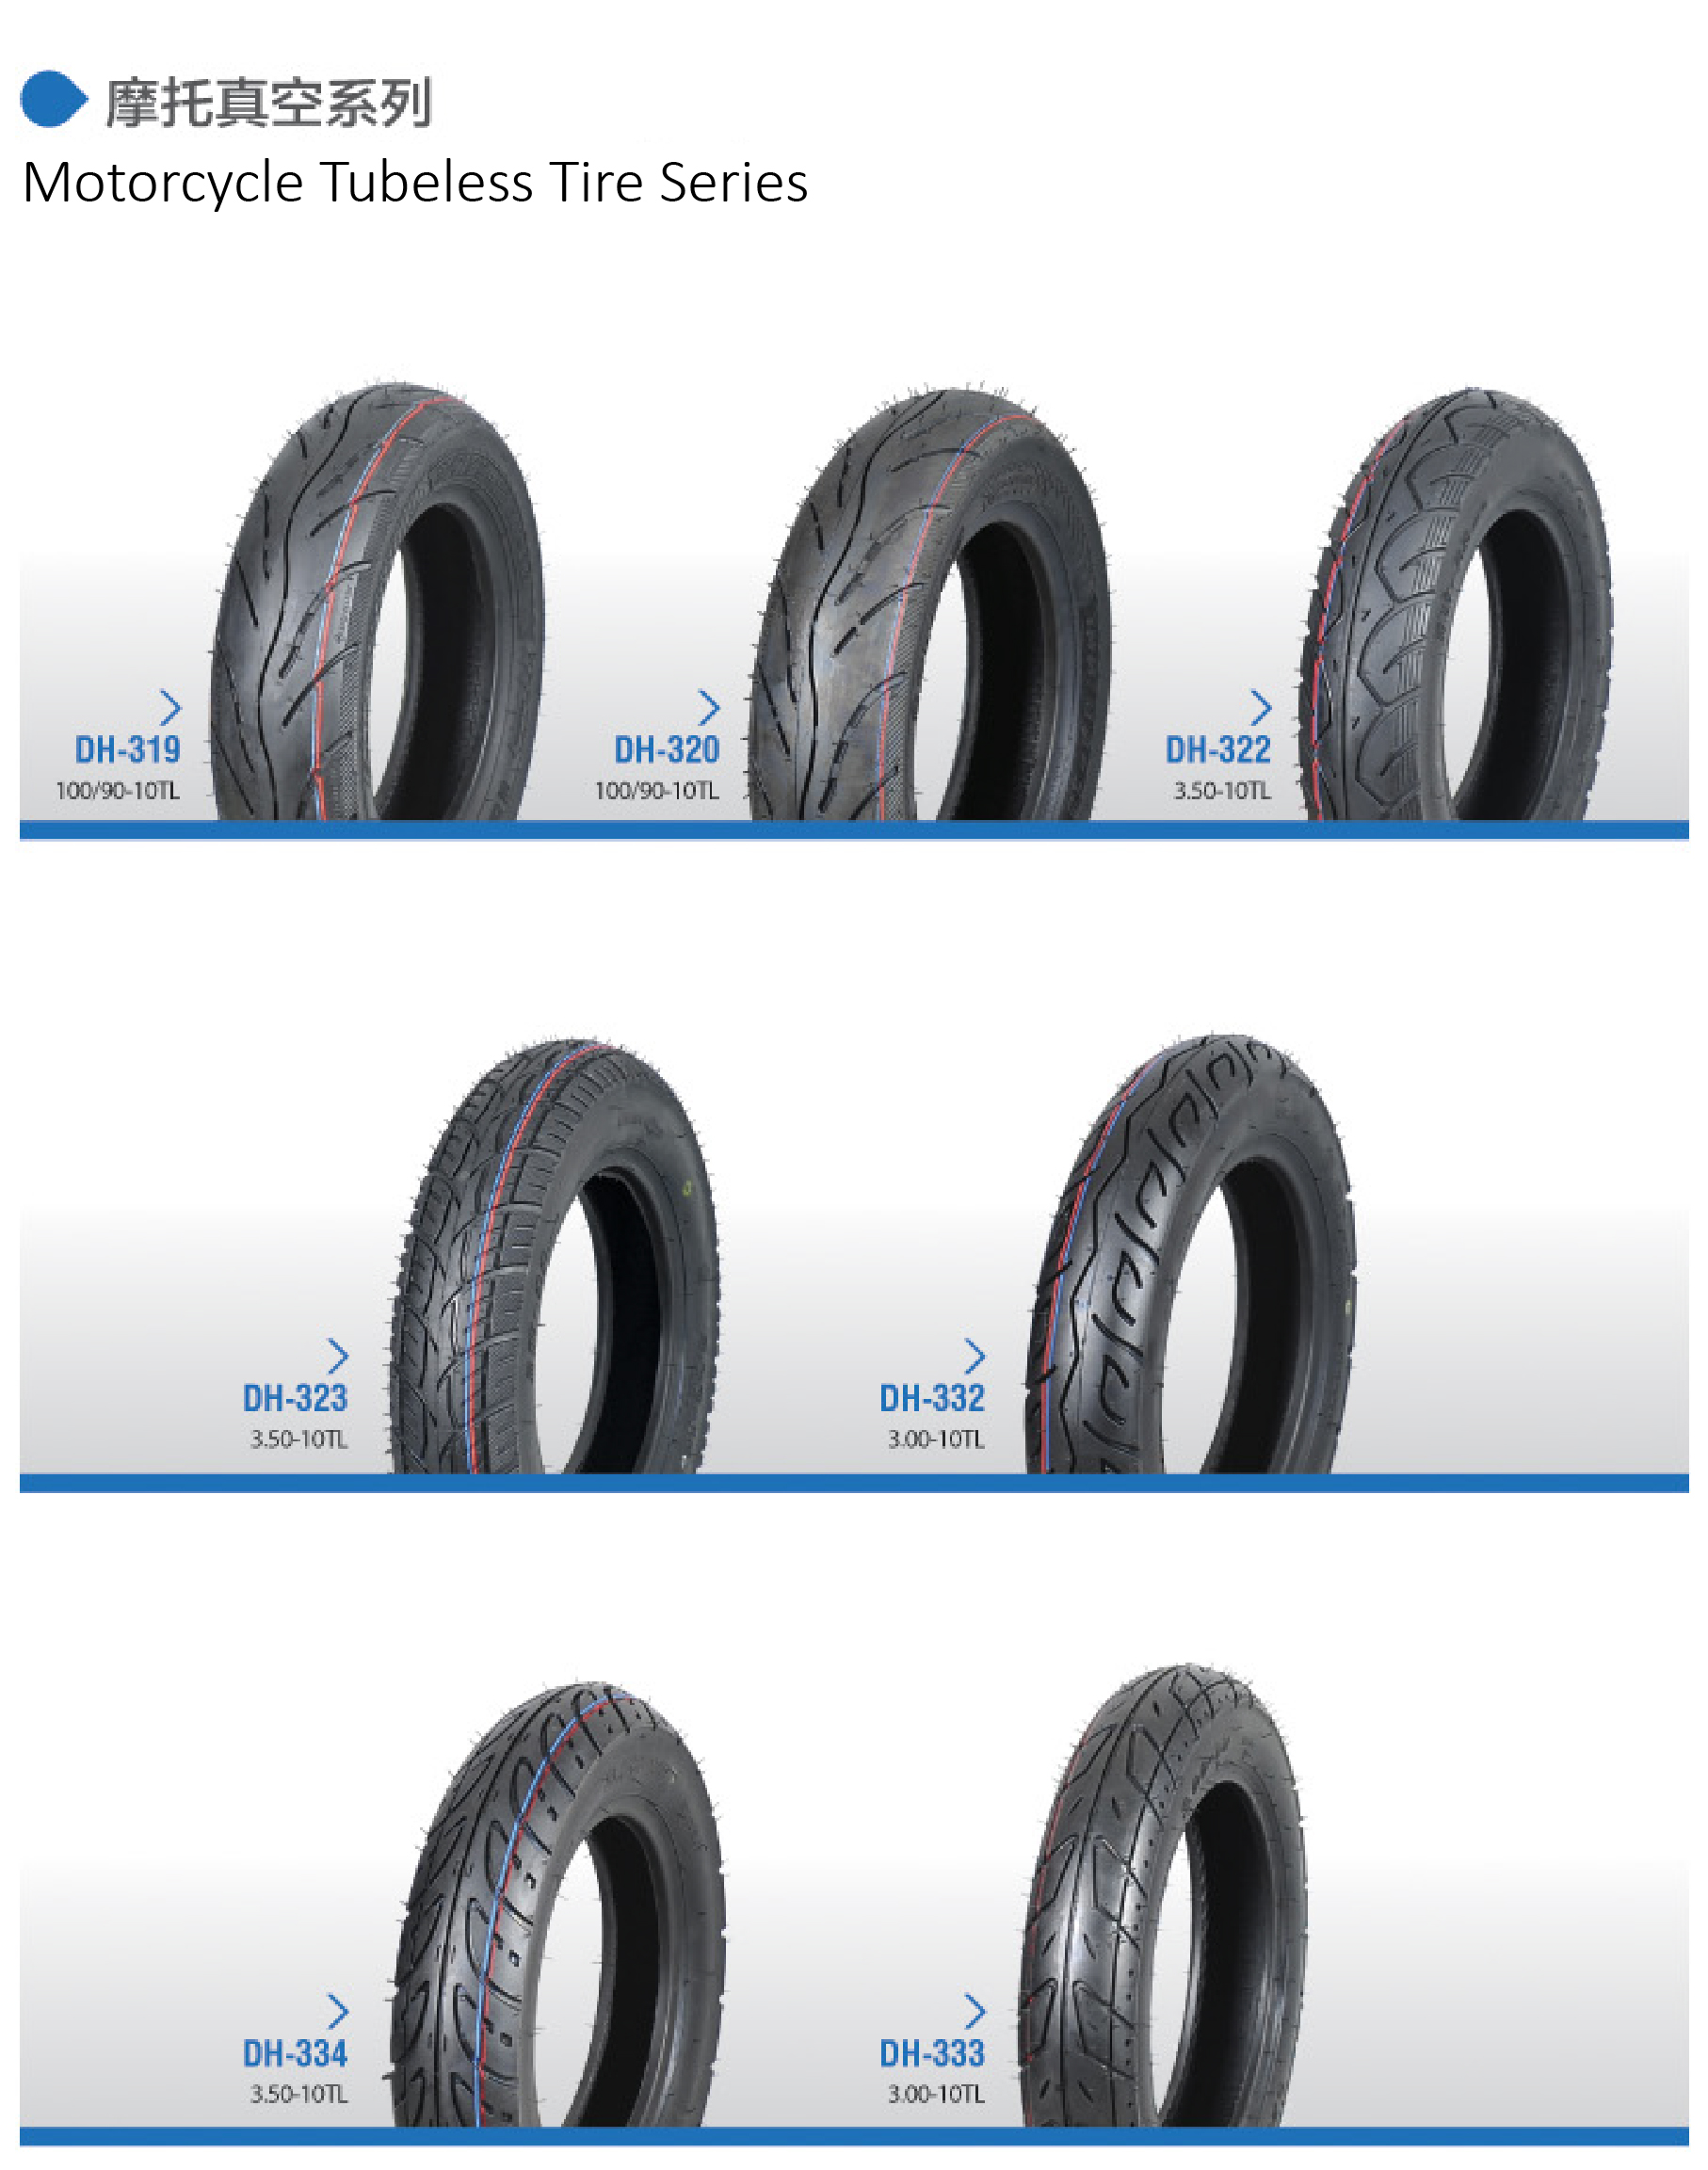 Motorcycle Tubeless Tires